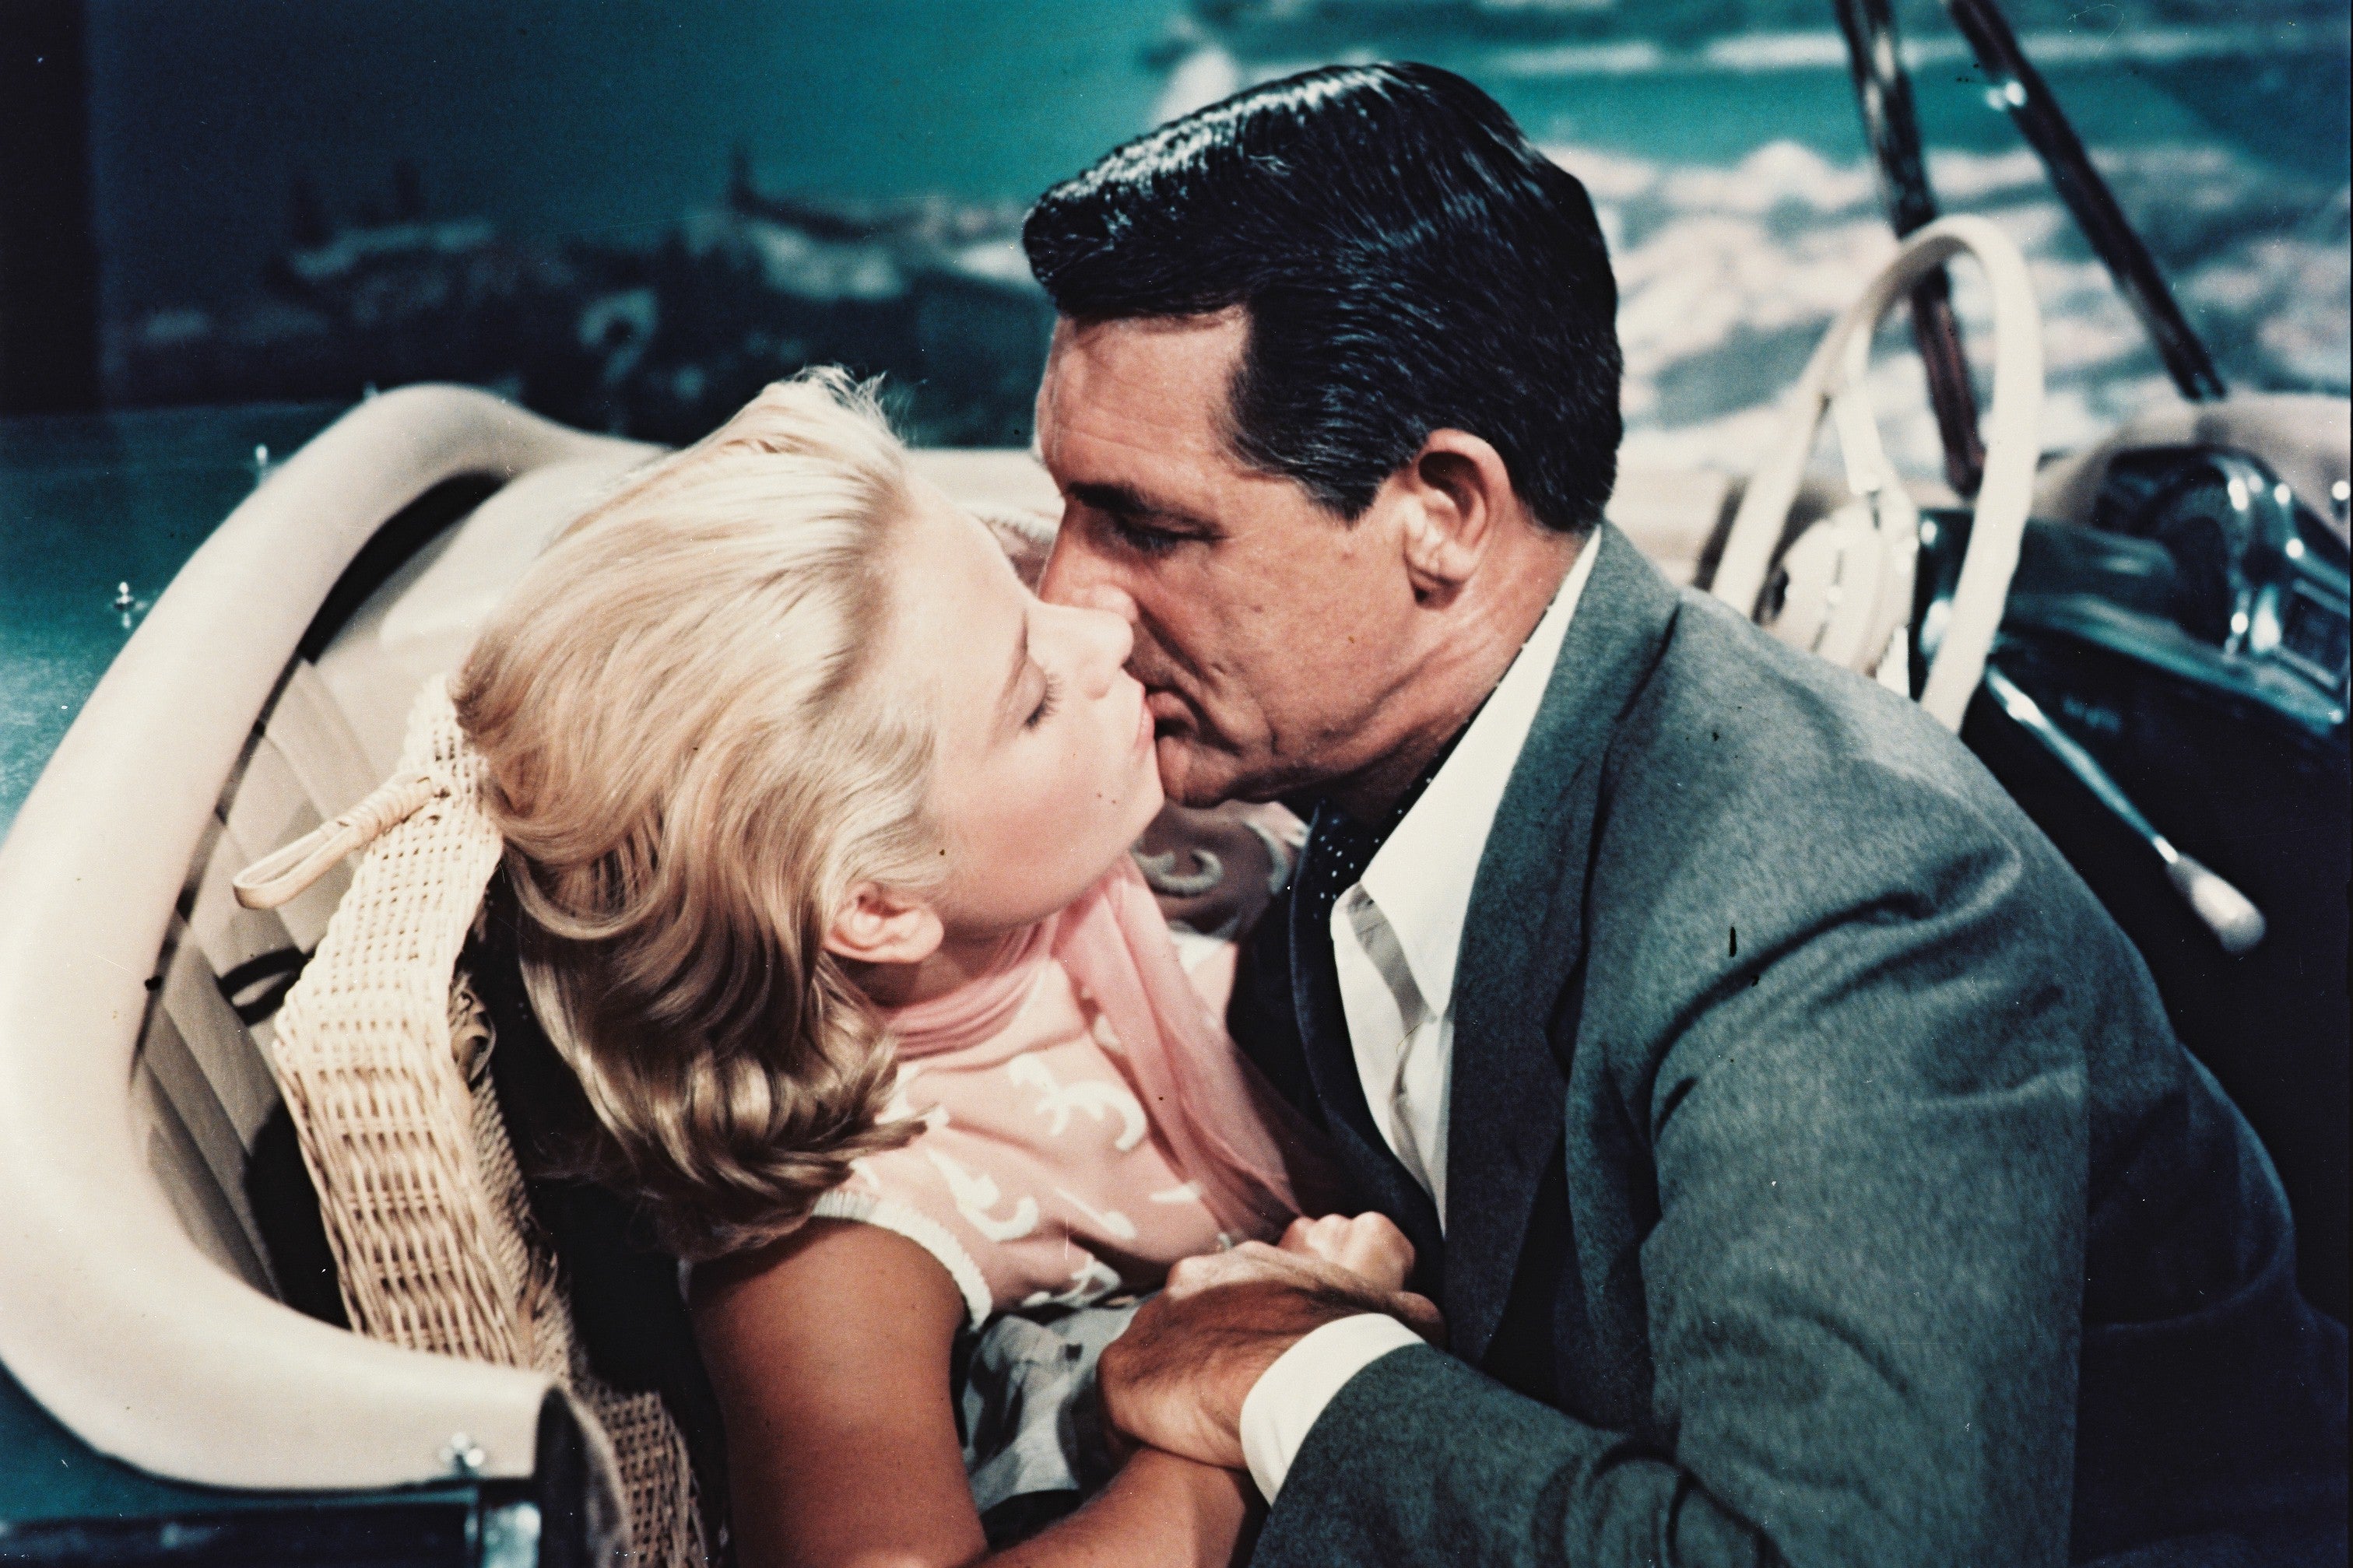 In this still from the classic 1950s movie: Cary Grant in a gray suit gives Grace Kelly, donning a pink dress, a passionate kiss while they're in a classic car. 